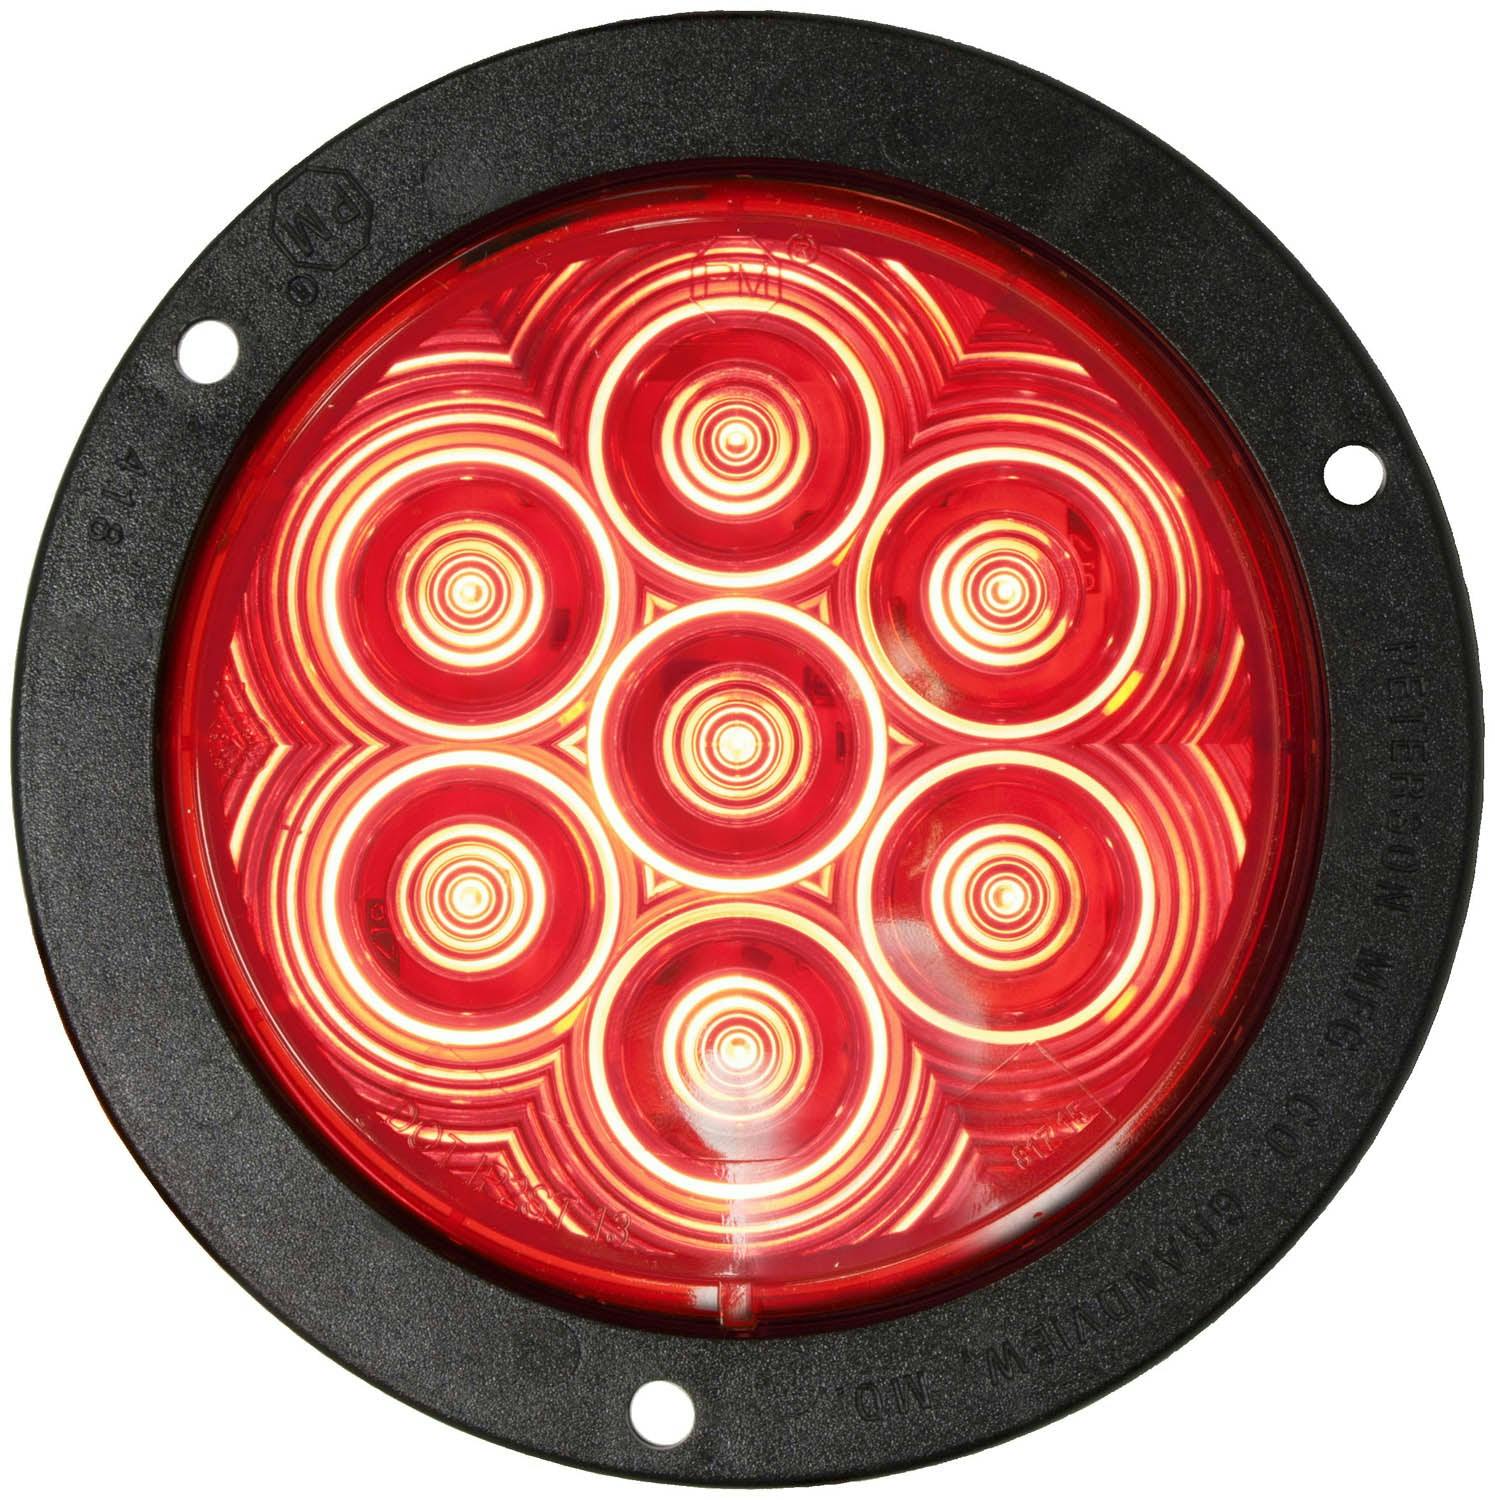 LED Stop/Turn/Tail, Round, Flange-Mount Kit, 4", red (Pack of 6)